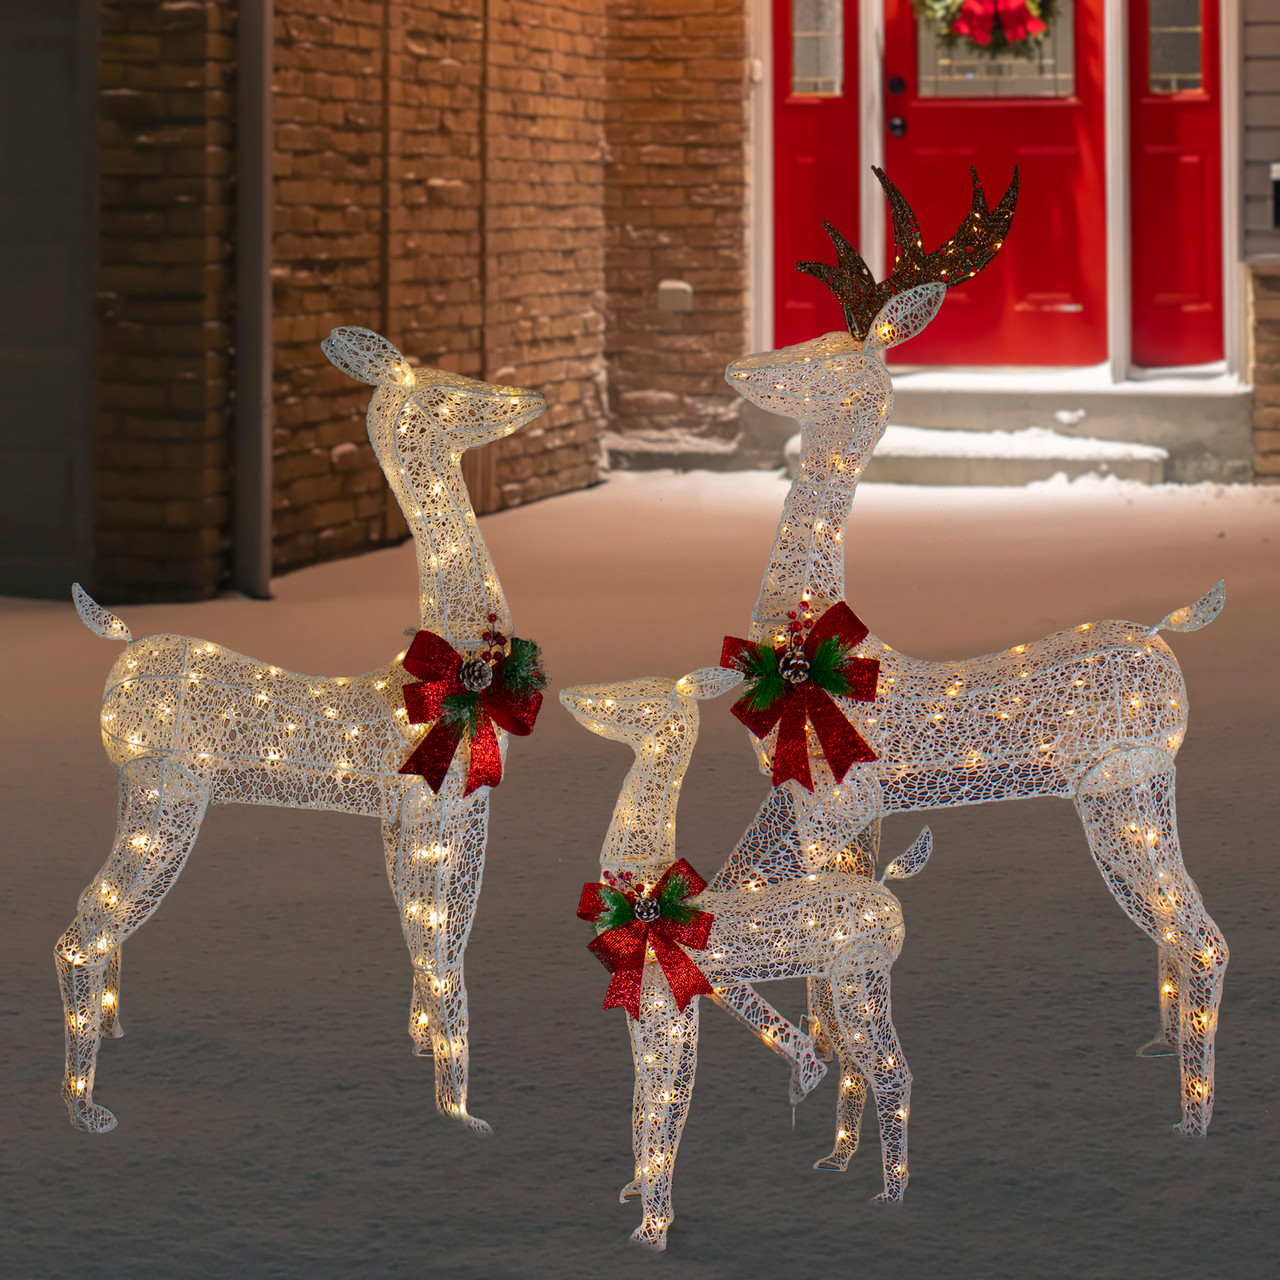 Lighted LED Deer Family with Red Bow, Set of 3